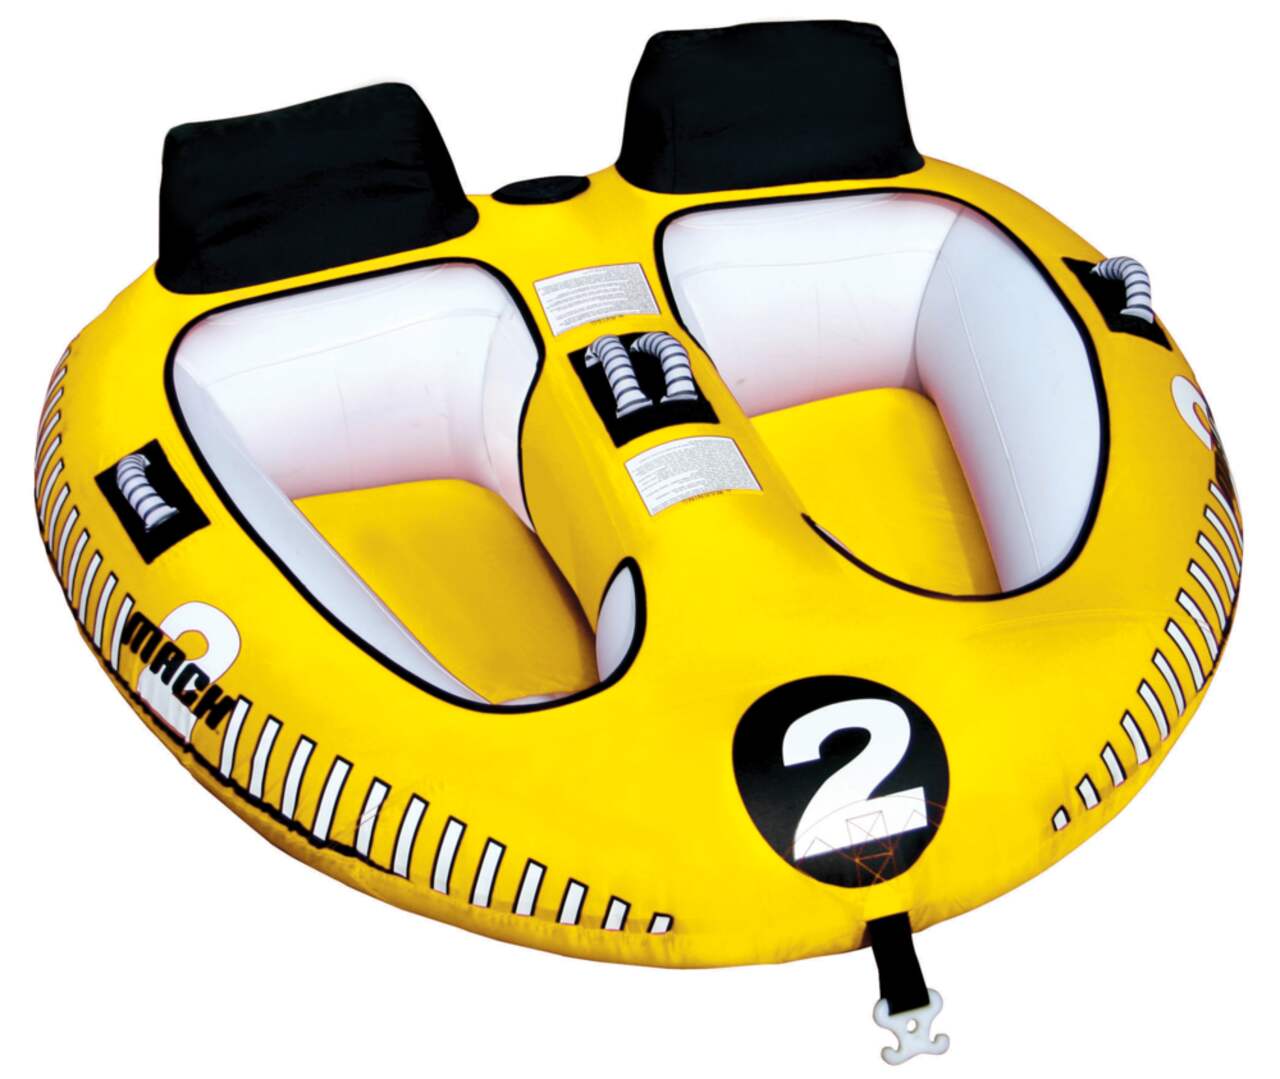 Boat Suspension Seats, Available In 2 Models